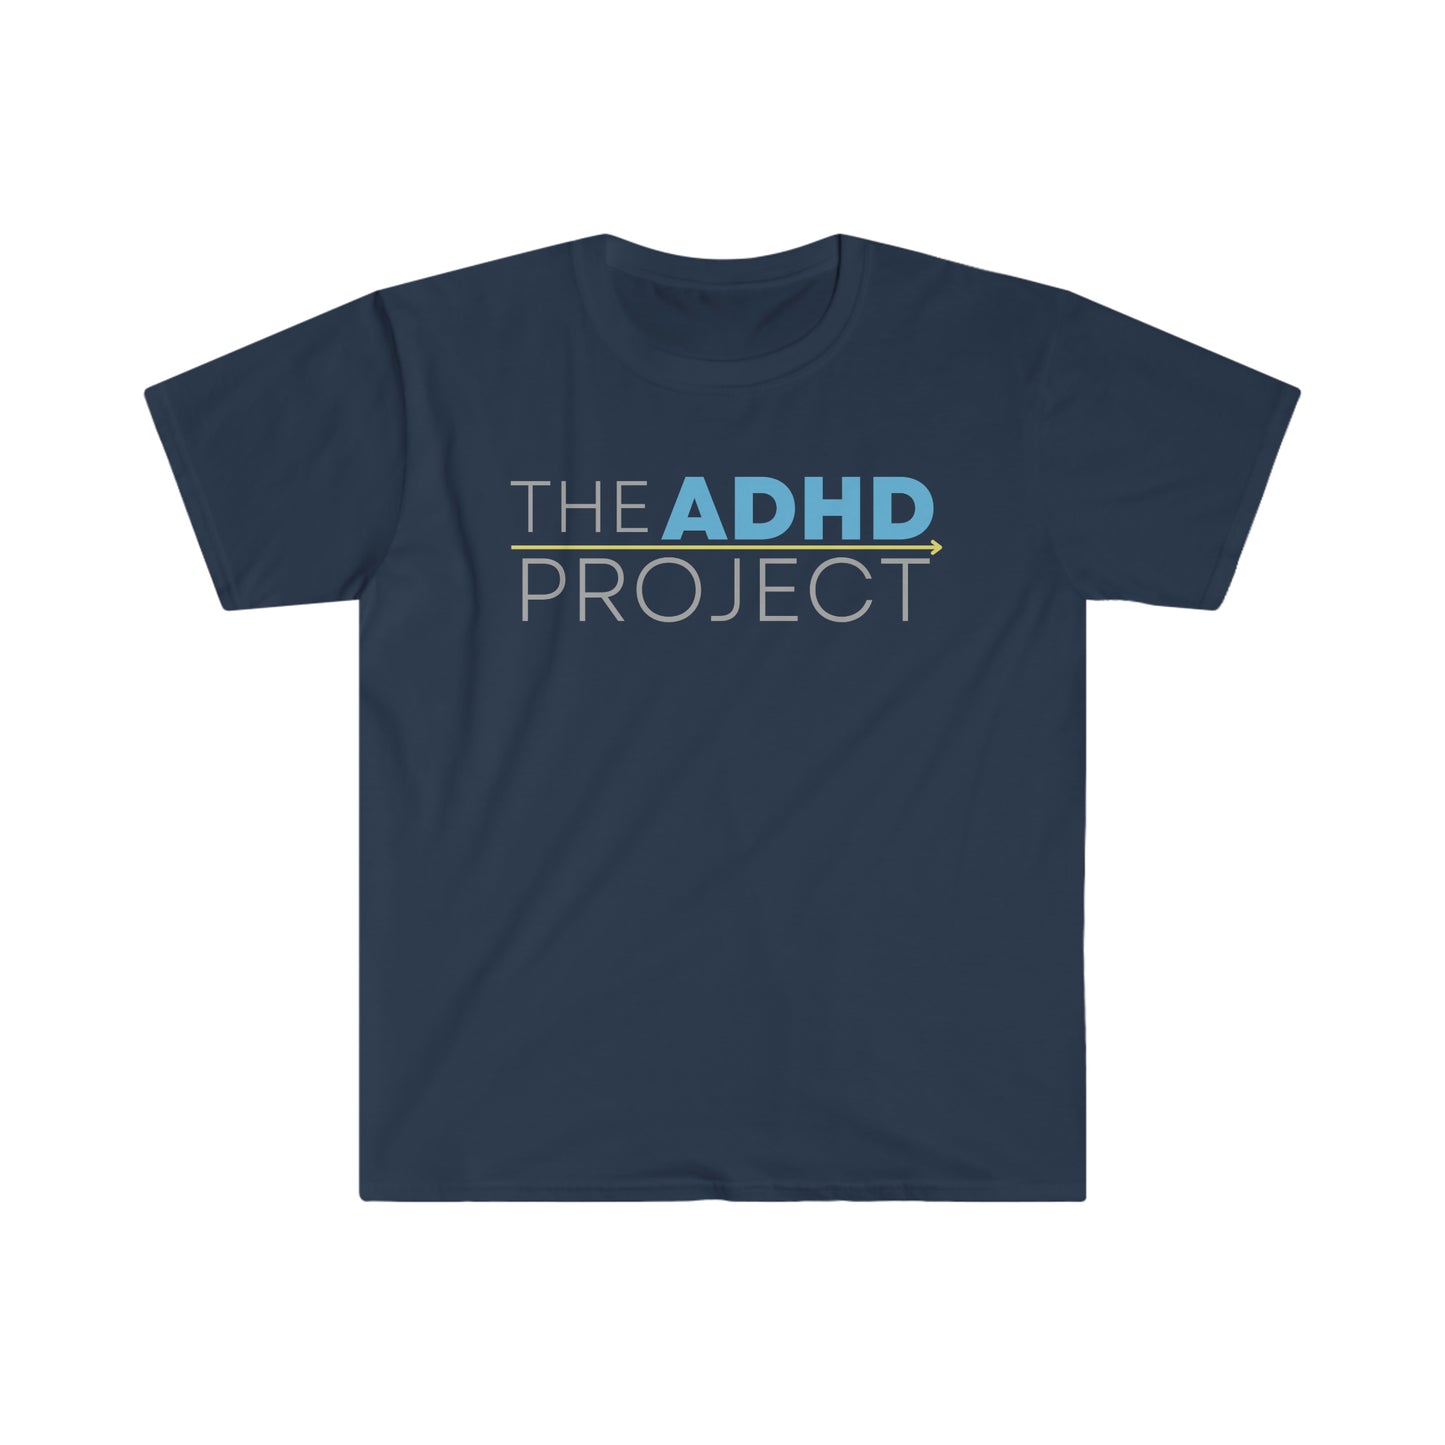 The ADHD Project Shirt